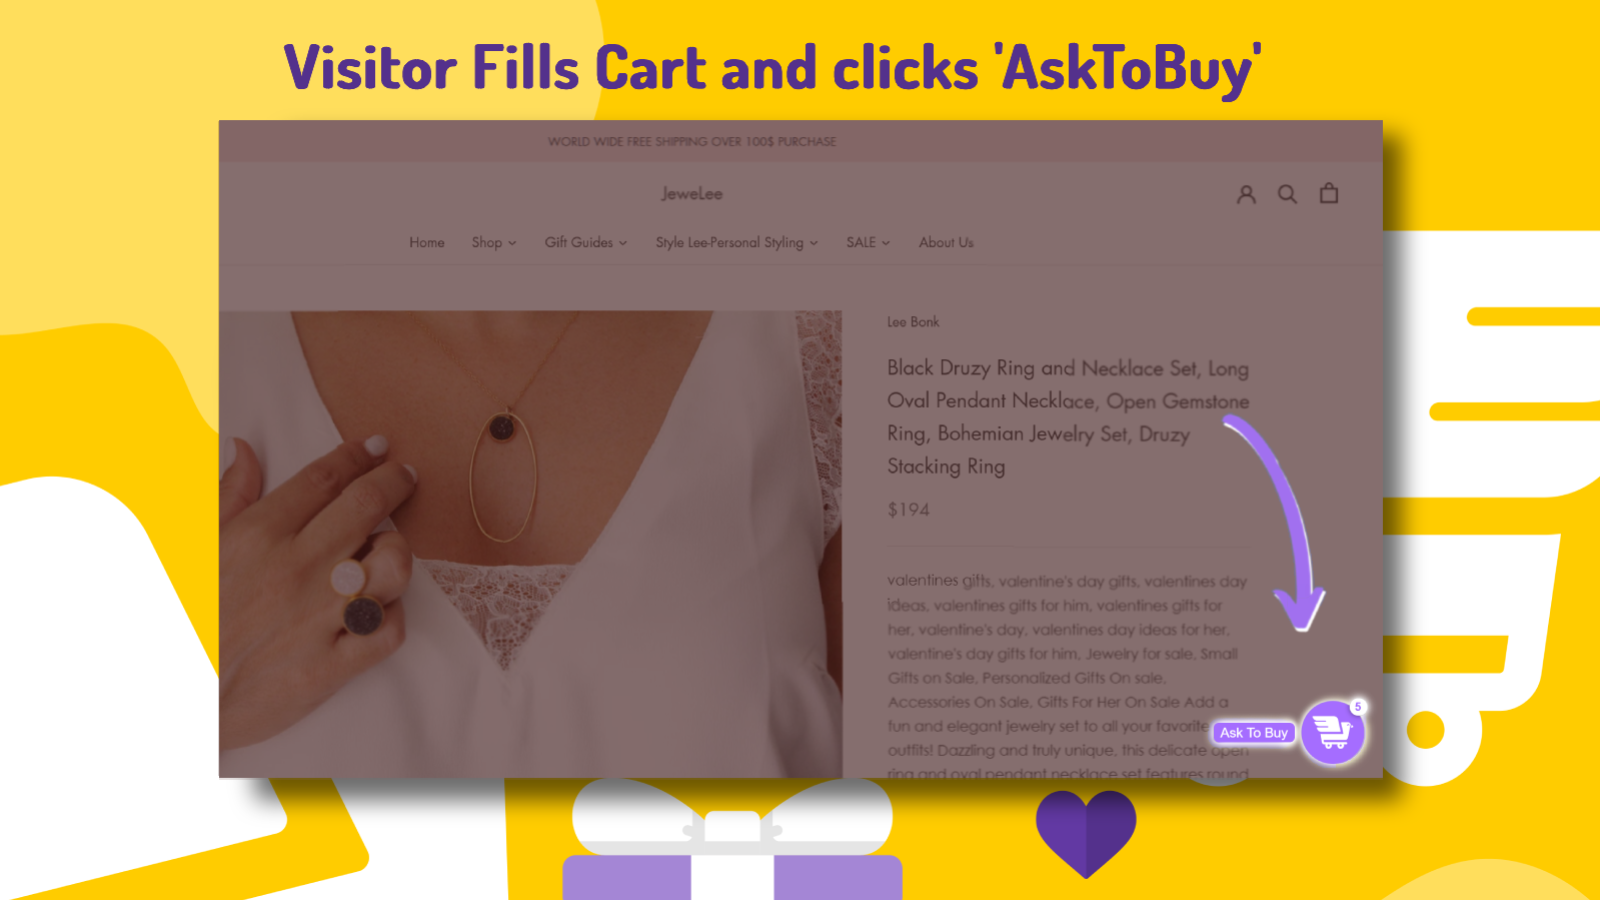 Visitor fills a cart and clicks 'ask to buy'